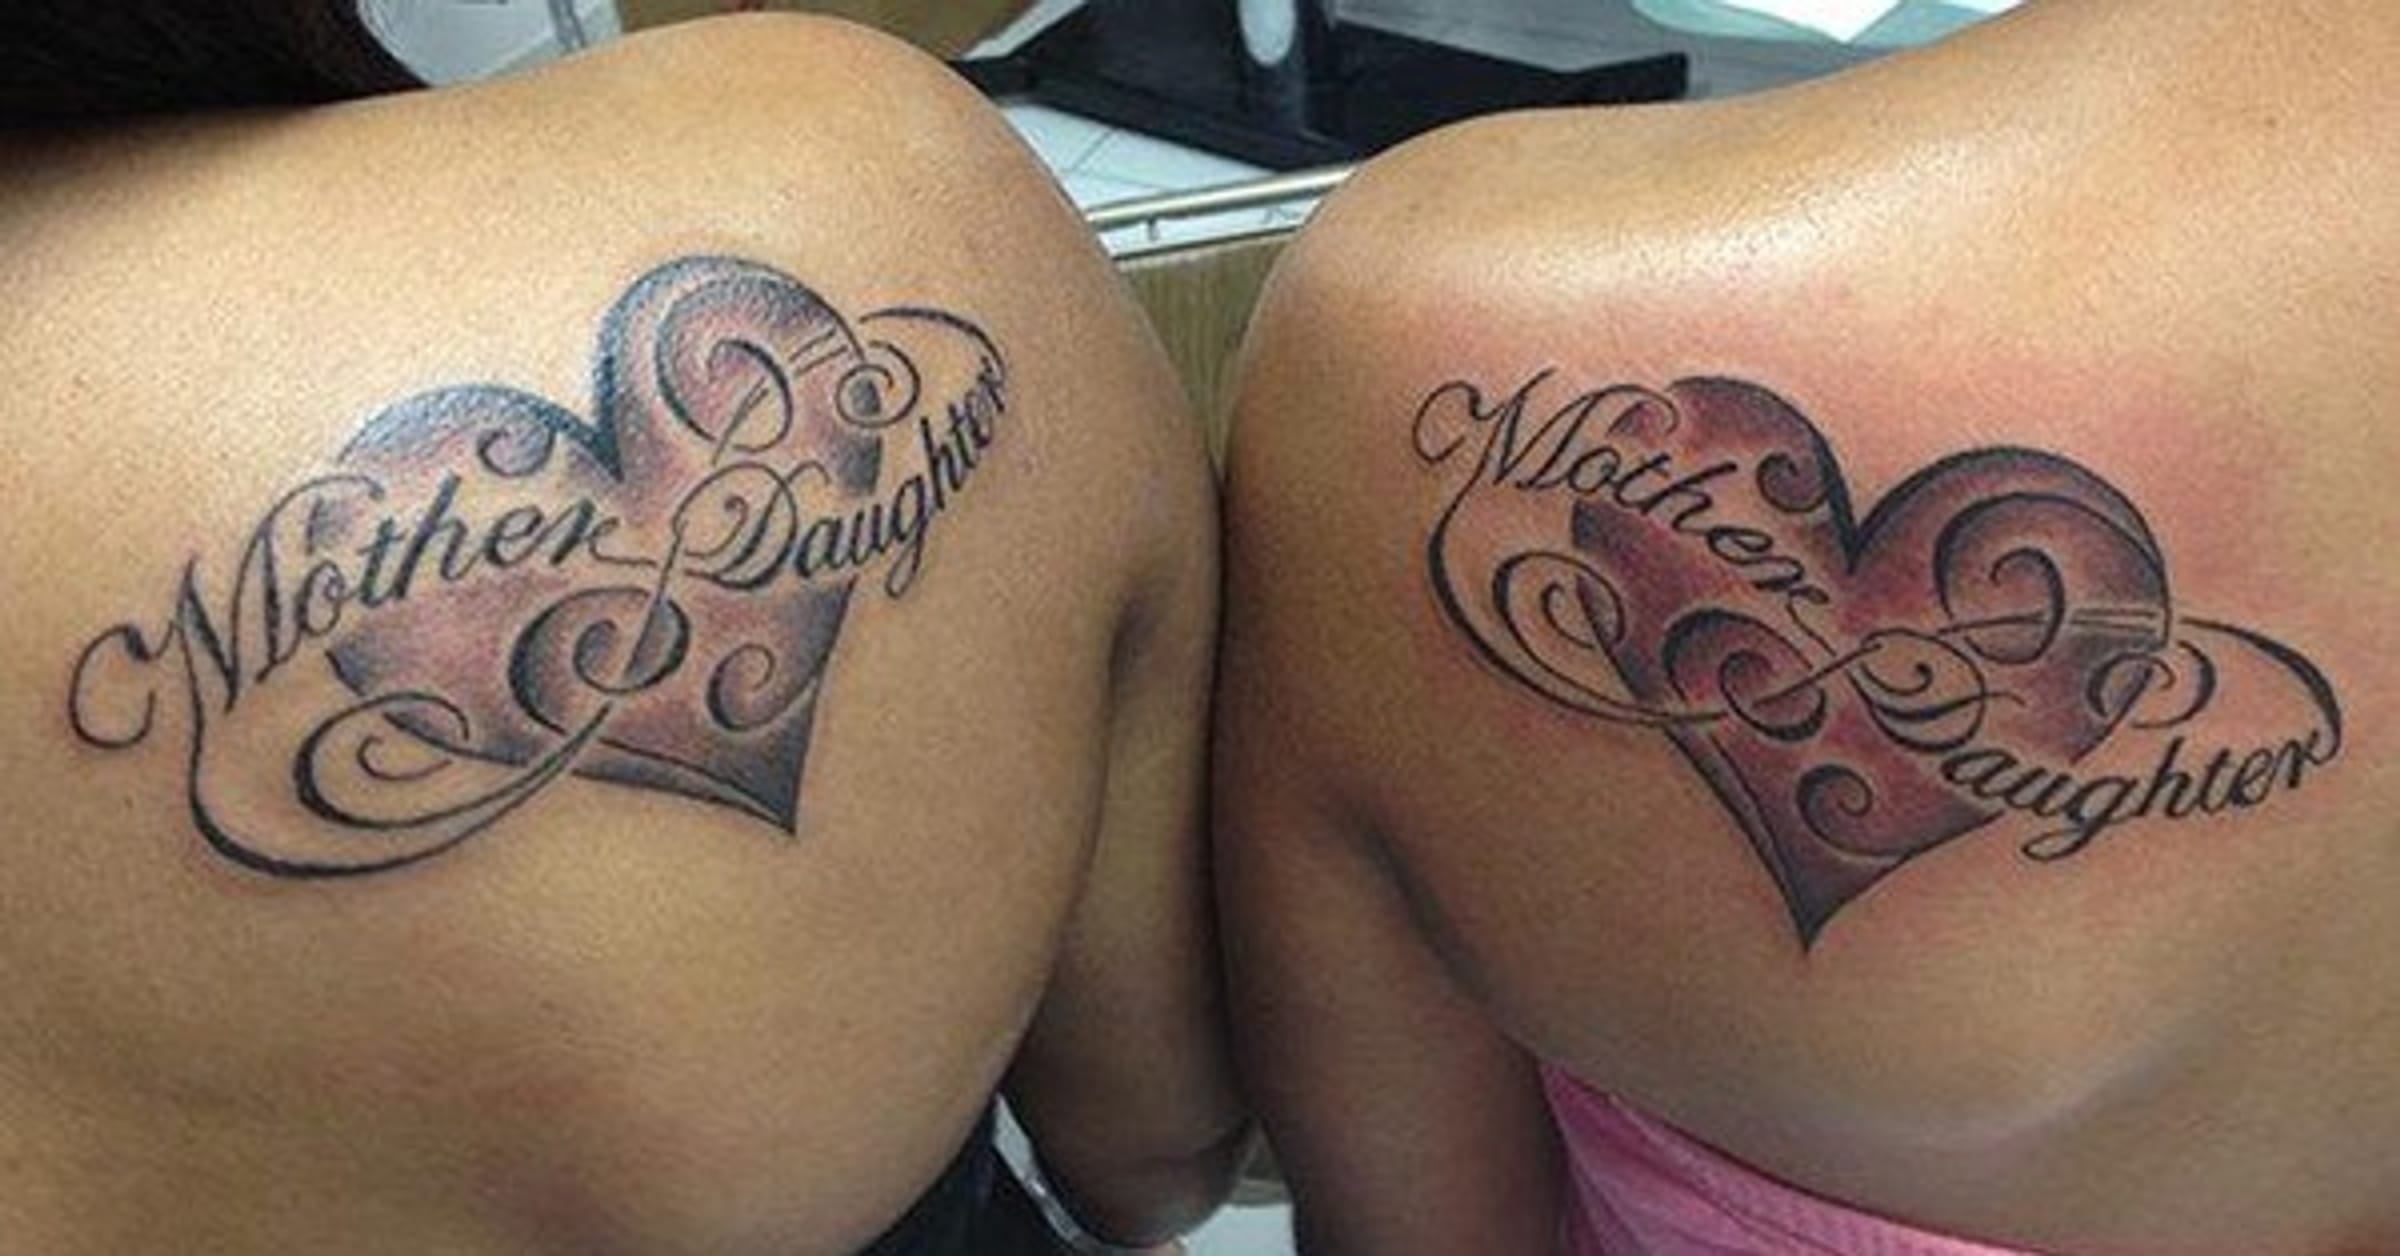 mother and daughter butterfly tattoos